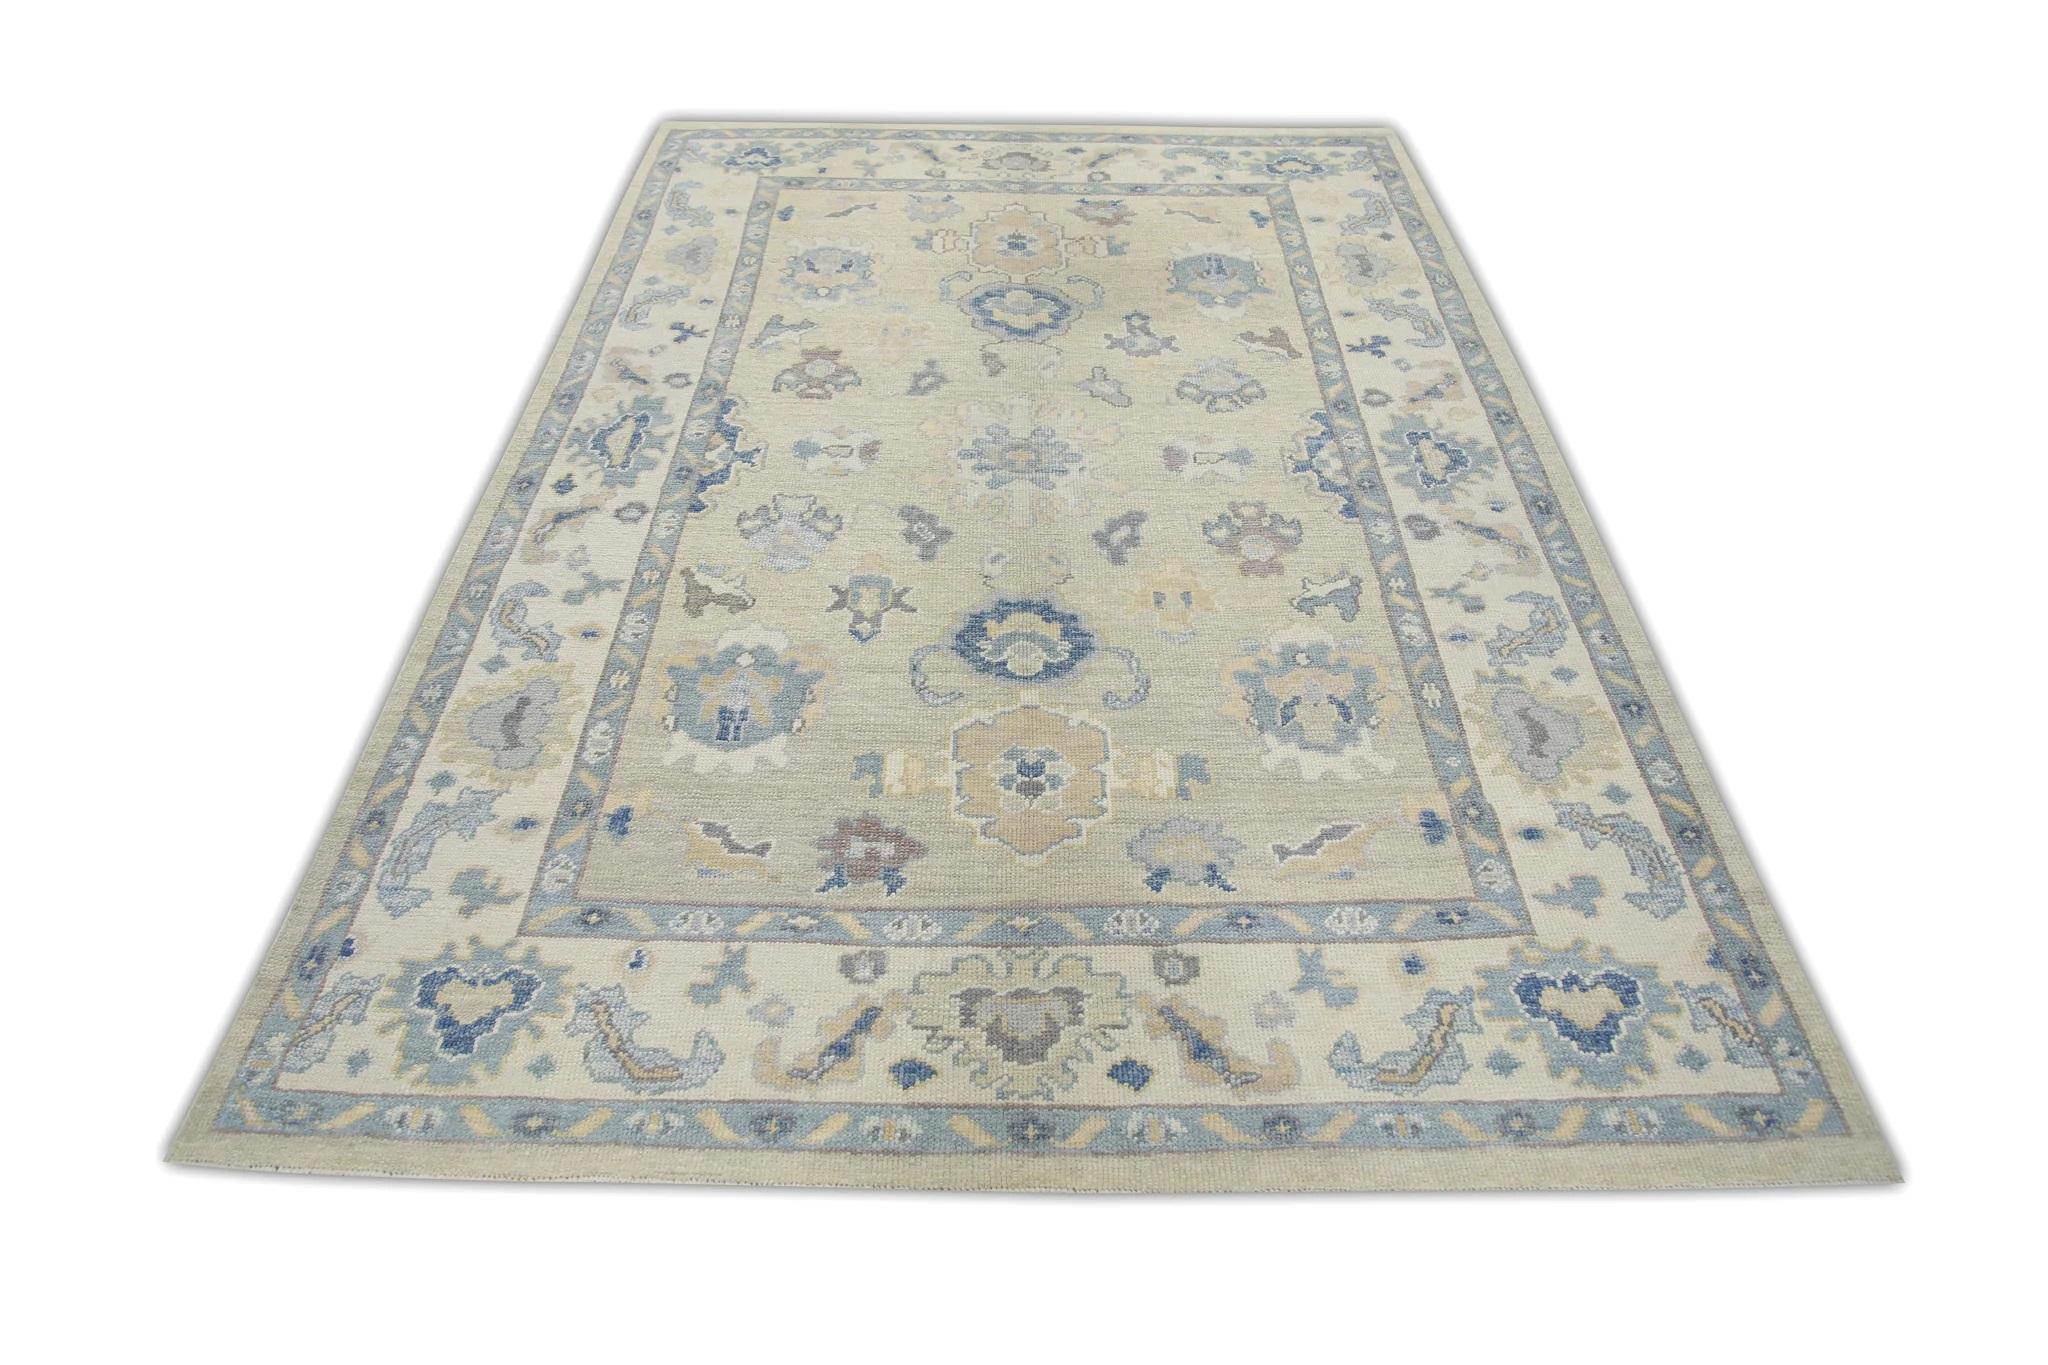 Contemporary Cream Handwoven Wool Turkish Oushak Rug in Blue Floral Design 6' x 8'10